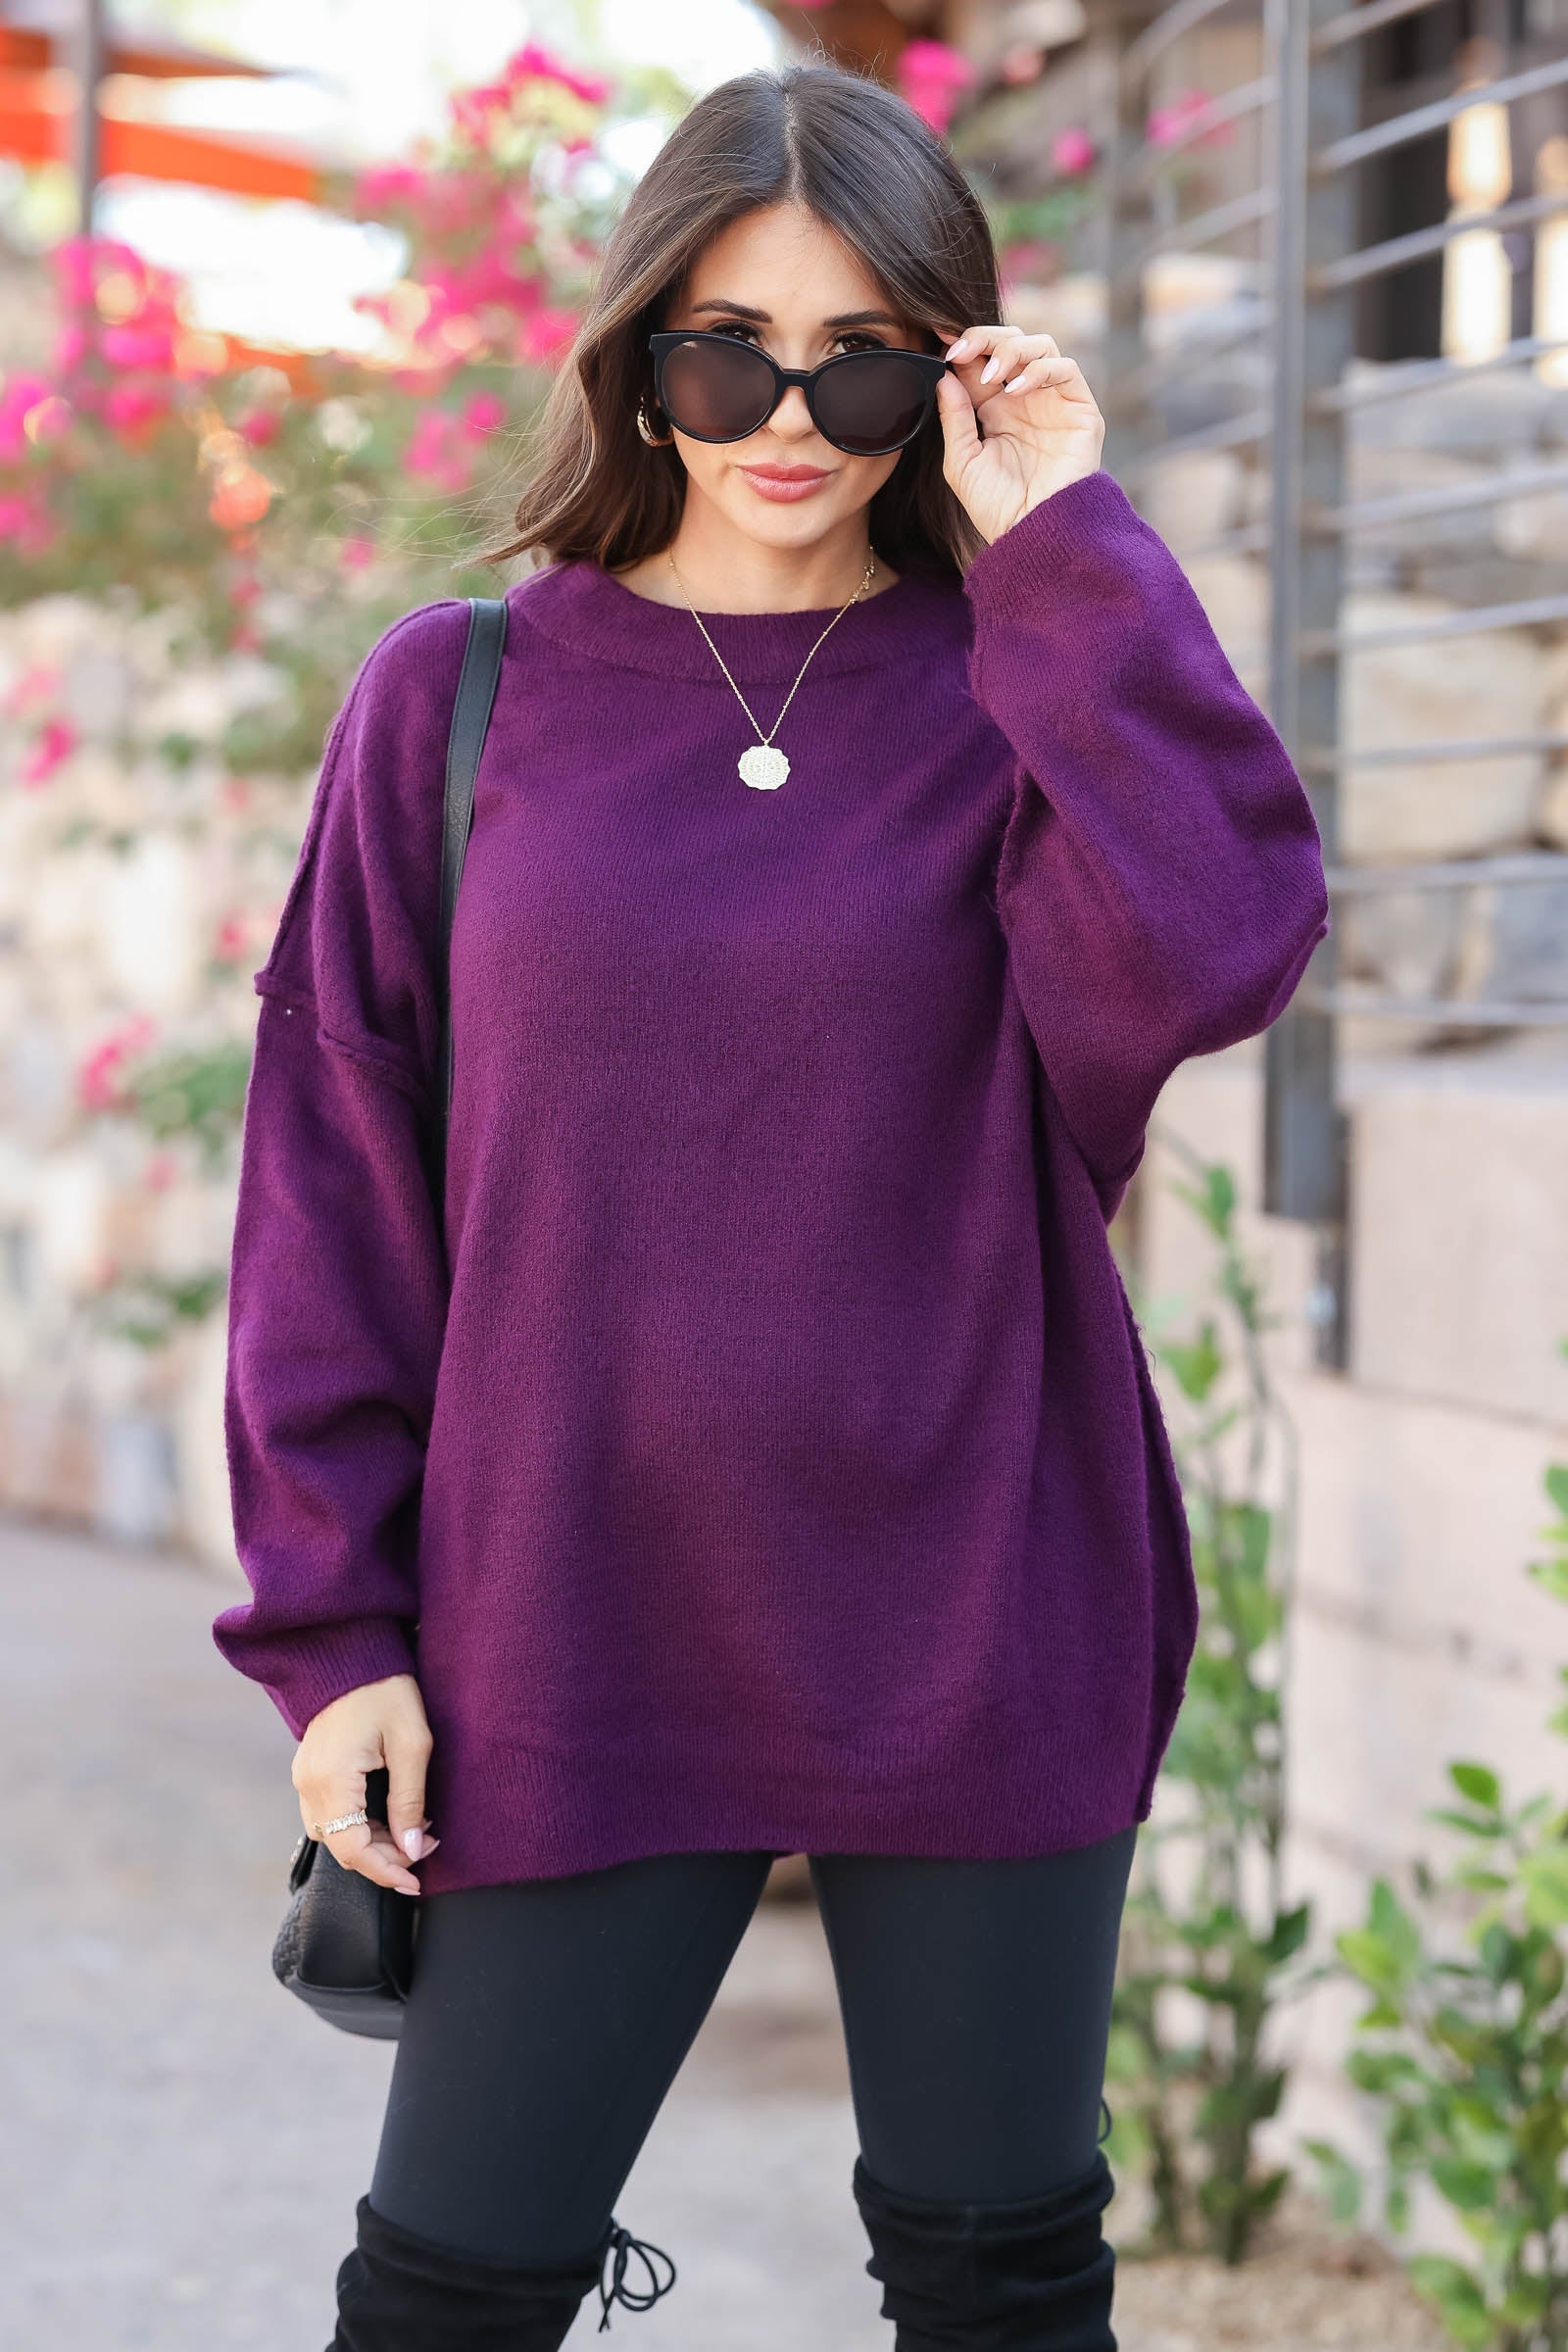 Made To Love Oversized Sweater - Plum, Closet Candy, 1